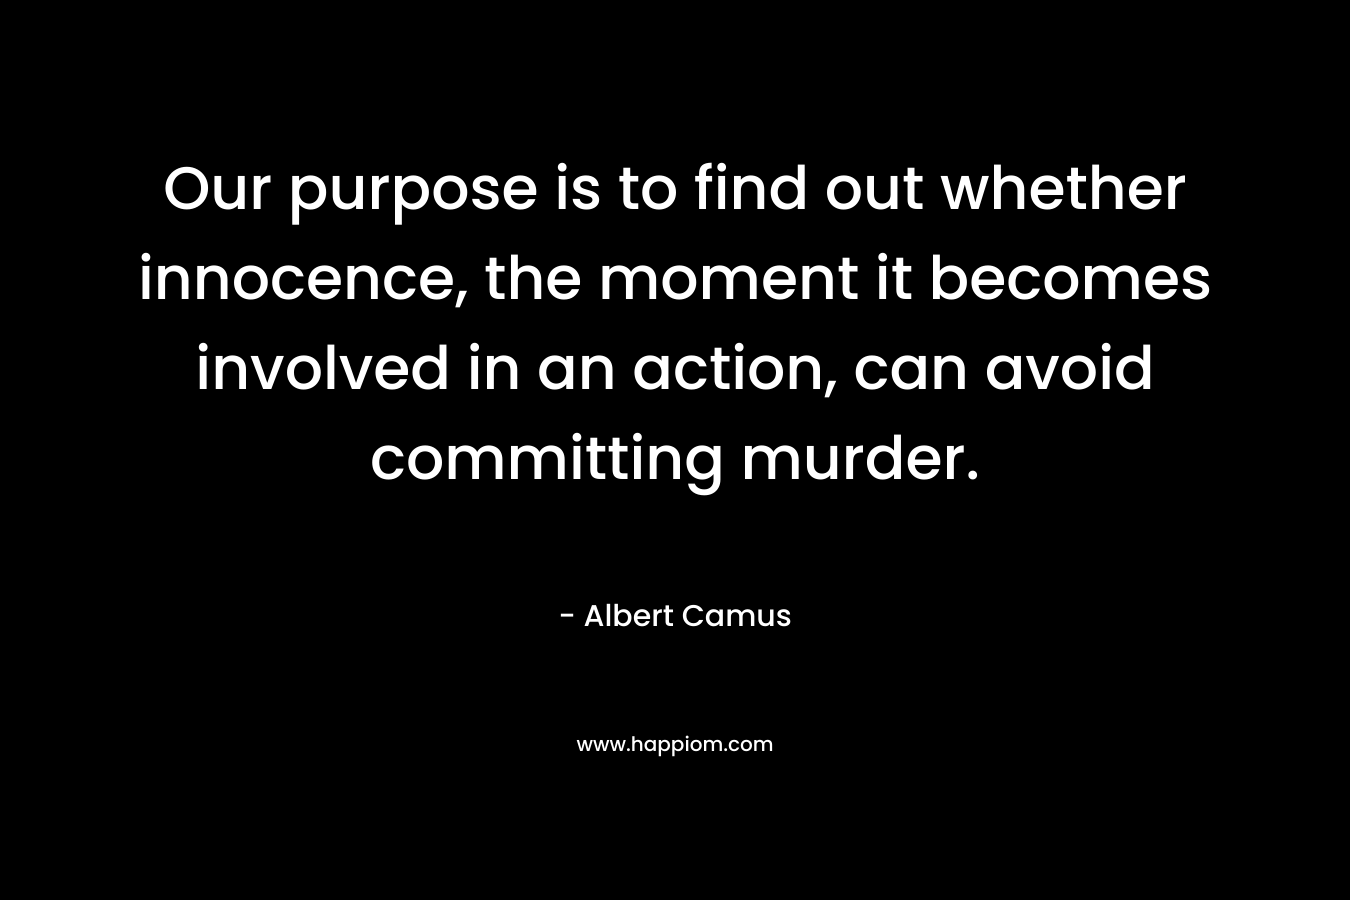 Our purpose is to find out whether innocence, the moment it becomes involved in an action, can avoid committing murder. – Albert Camus